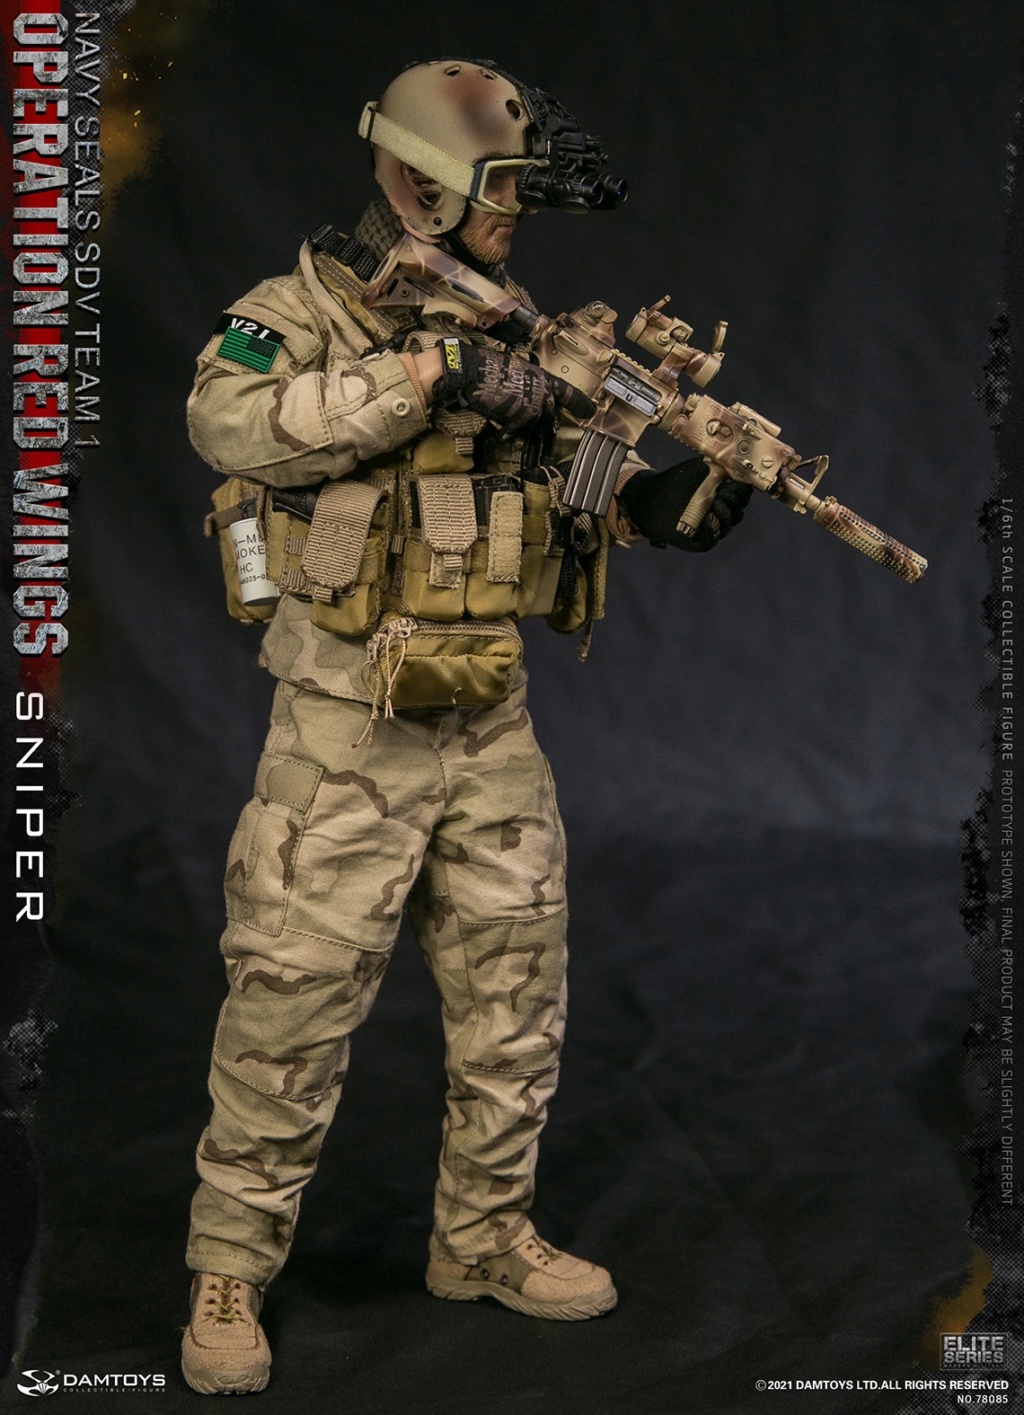 FirstTransportVehicleBrigade - NEW PRODUCT: DAMTOYS: 1/6 Operation Red Wings-SEAL Special Forces First Transport Vehicle Brigade-Sniper #78085 10294811